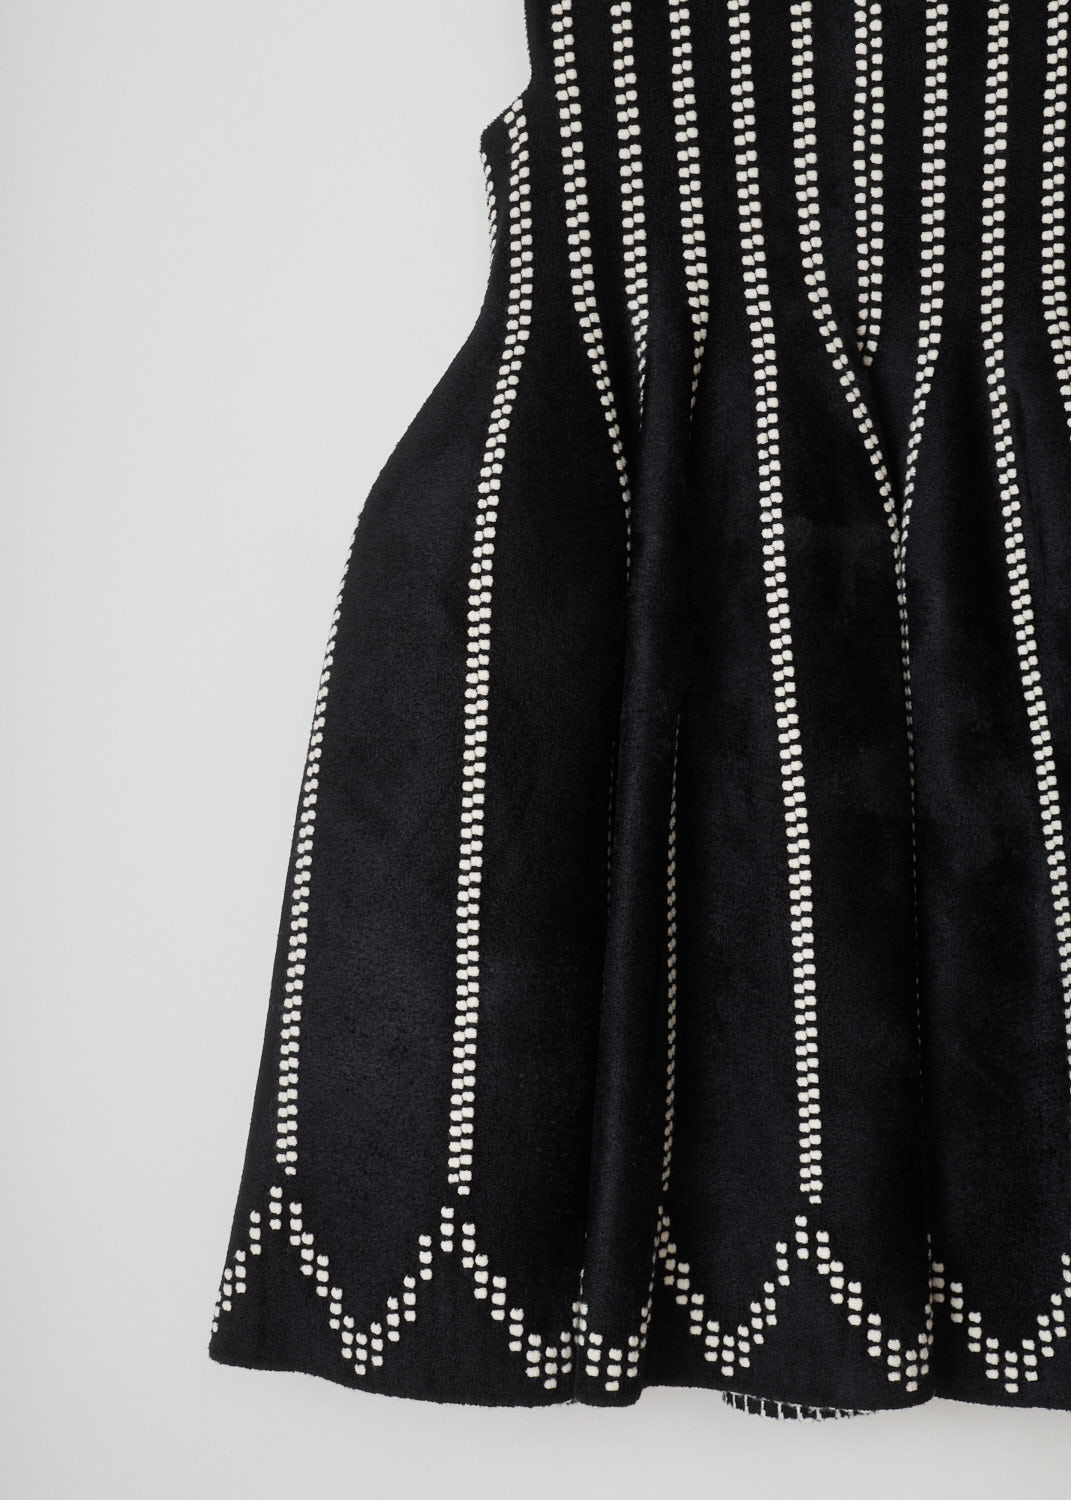 AlaÃ¯a, Black dotted mini-dress, 3H9R367CM071_robe_sm_glacier_velours_C962_noir_ivoire, black white, detail, Ivory dots cover this thigh-high sundress. Featuring no sleeves and a boat neckline. Made with wool the fabric has a roughened wool feel, so it will keep you warm. The skirt has a zigzagging line of dots above the hem.